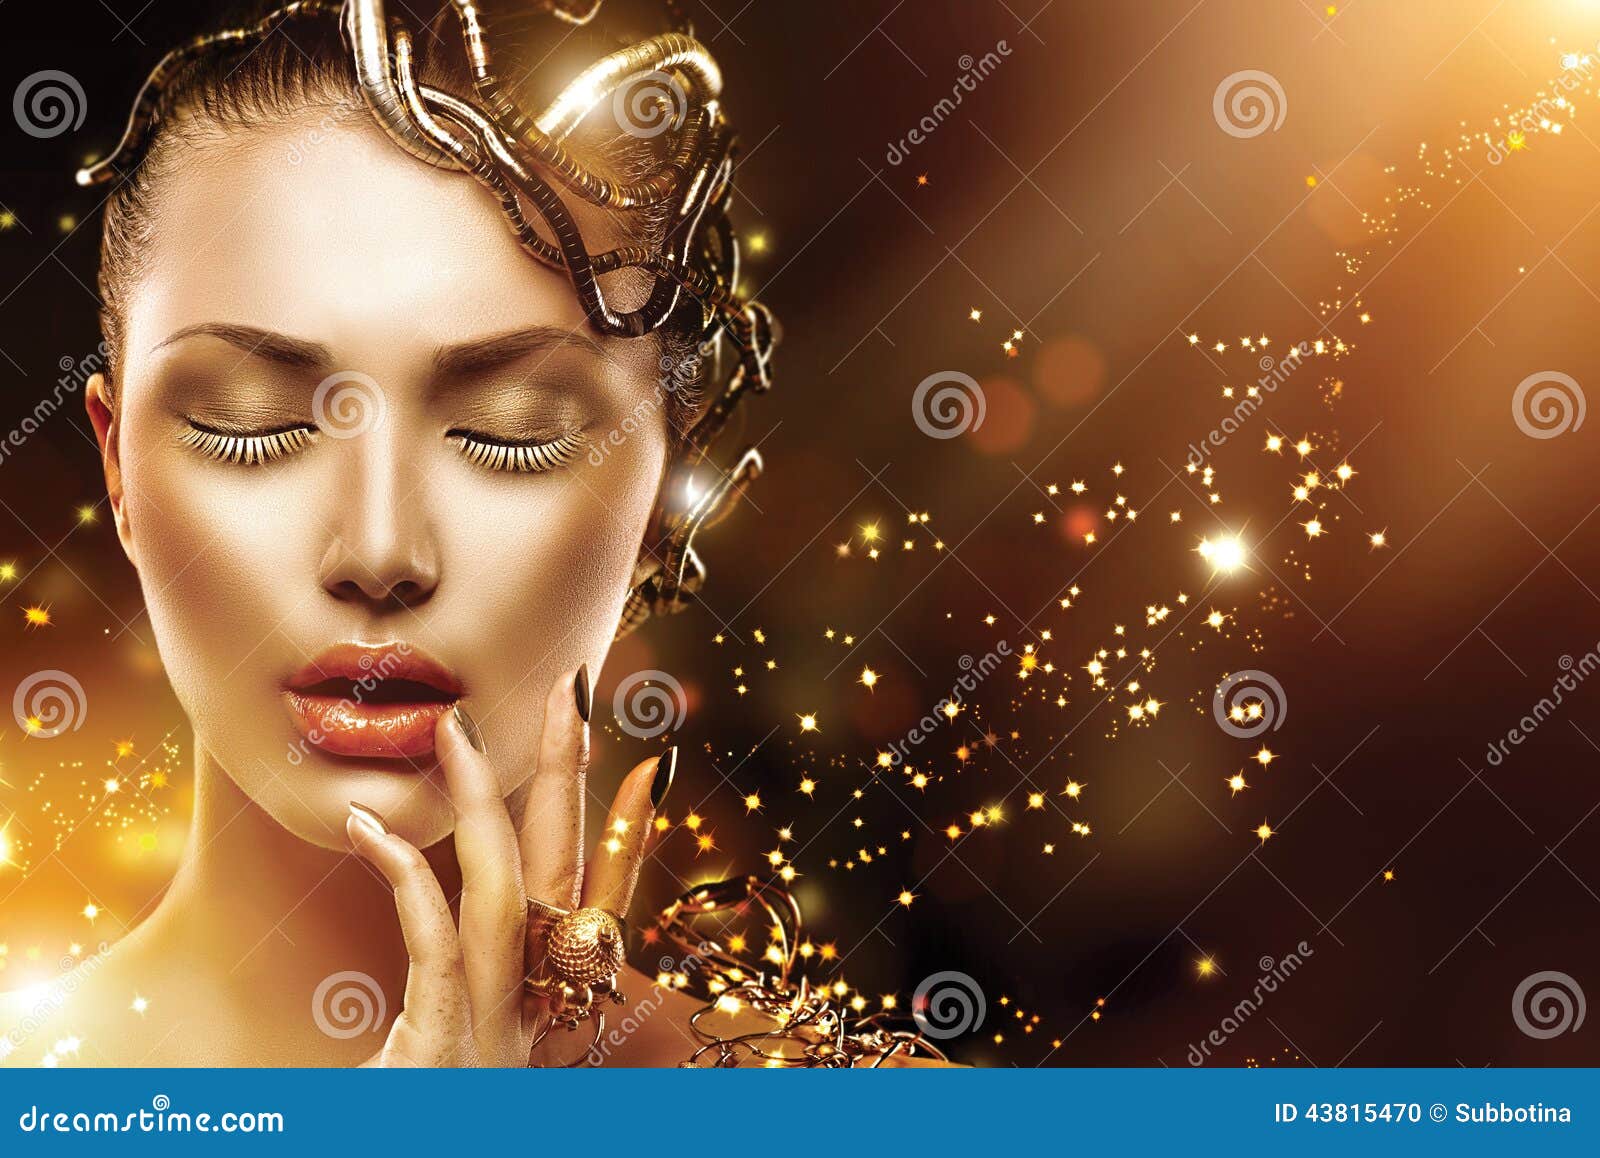 model girl face with gold make-up and accessories